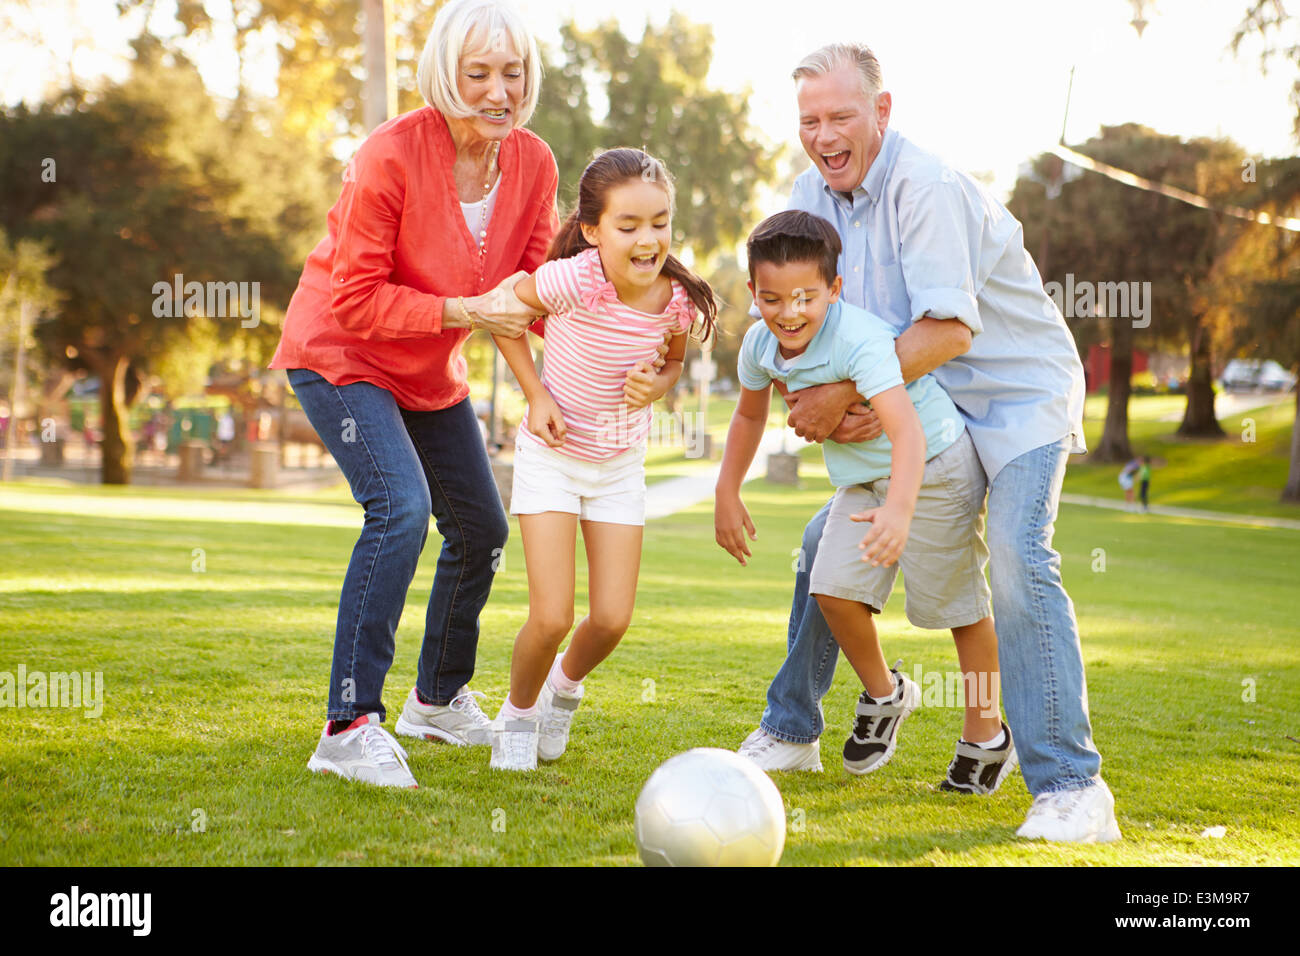 Grandparents Playing Soccer With Grandchildren In Park Stock Photo